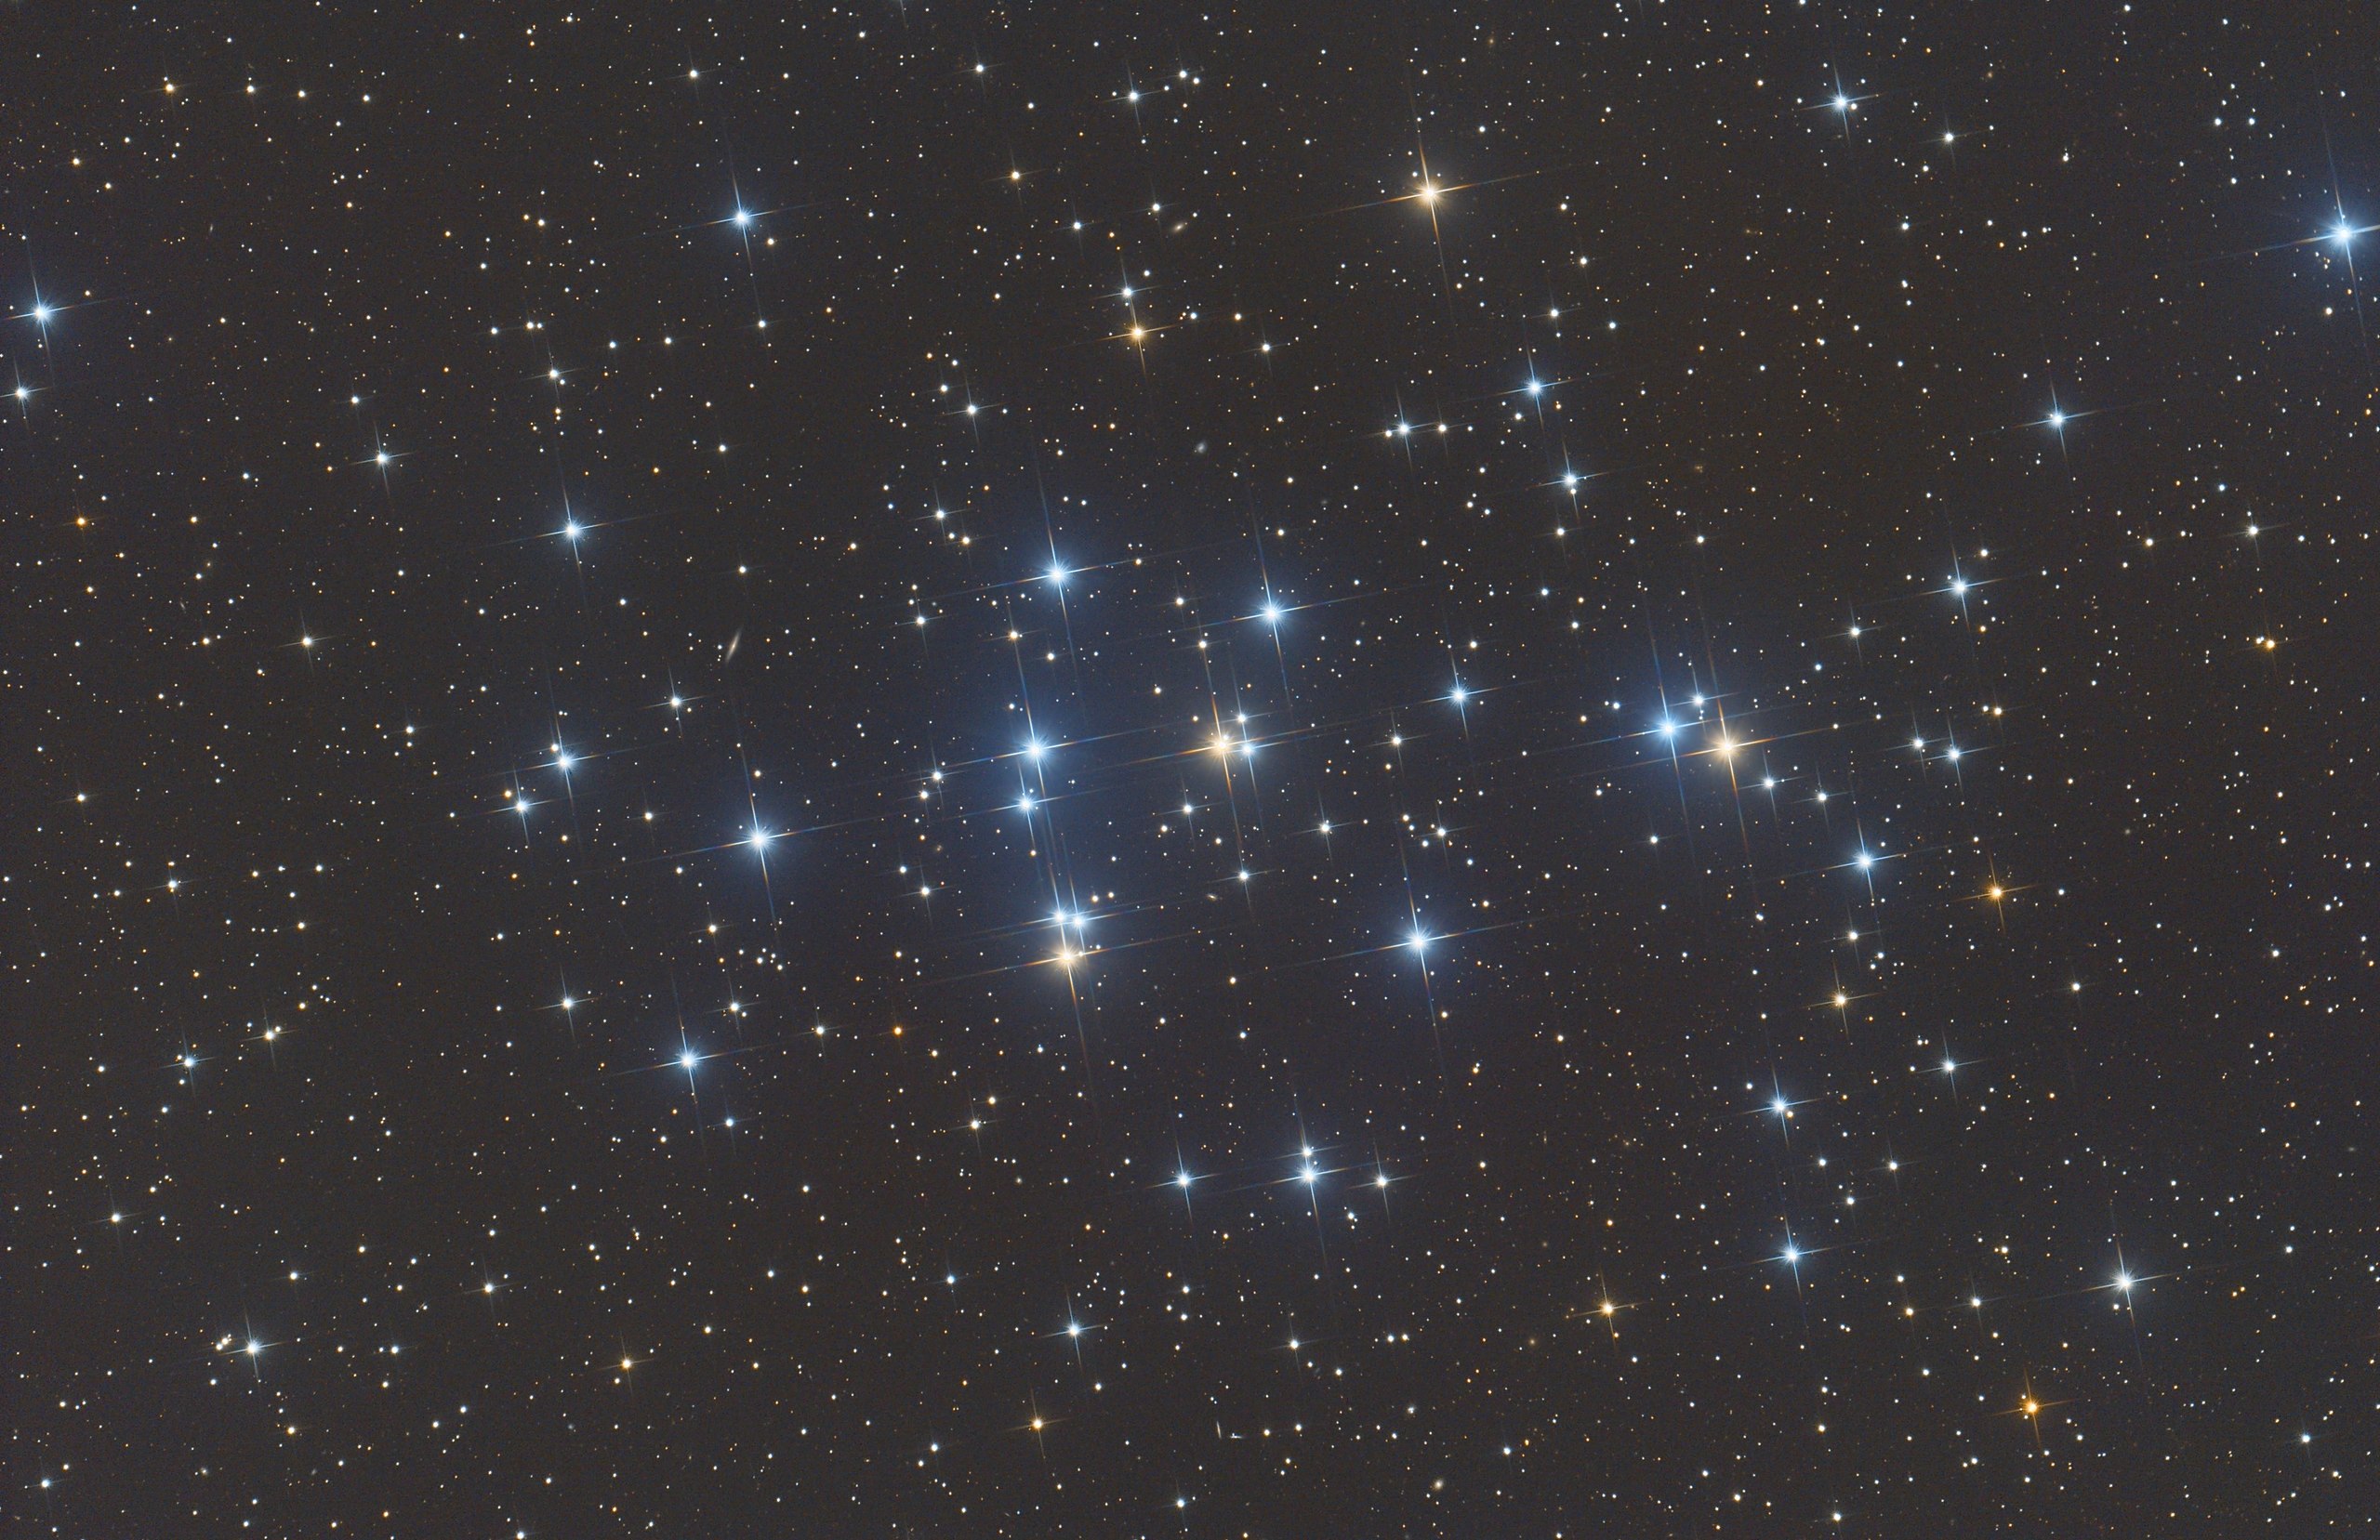 The Beehive Cluster in the constellation of Cancer.